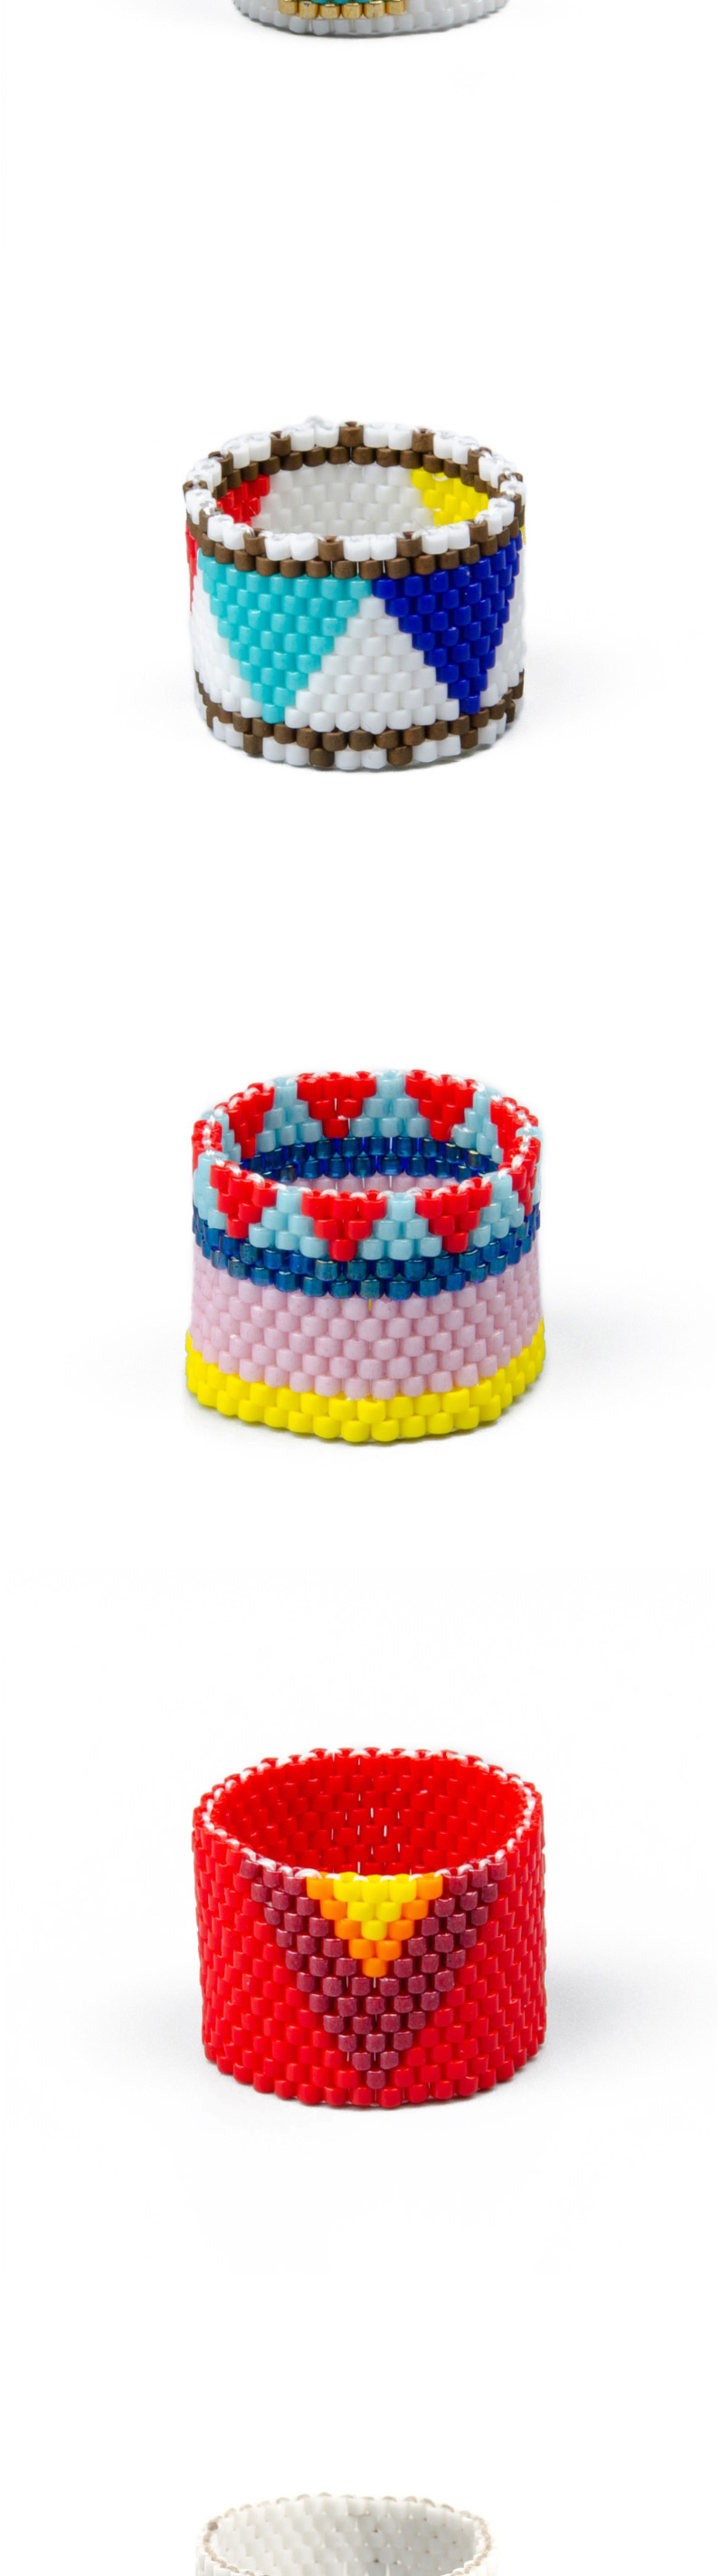 Fashion Red + Blue Beaded Woven Triangle Wide Band Ring,Fashion Rings